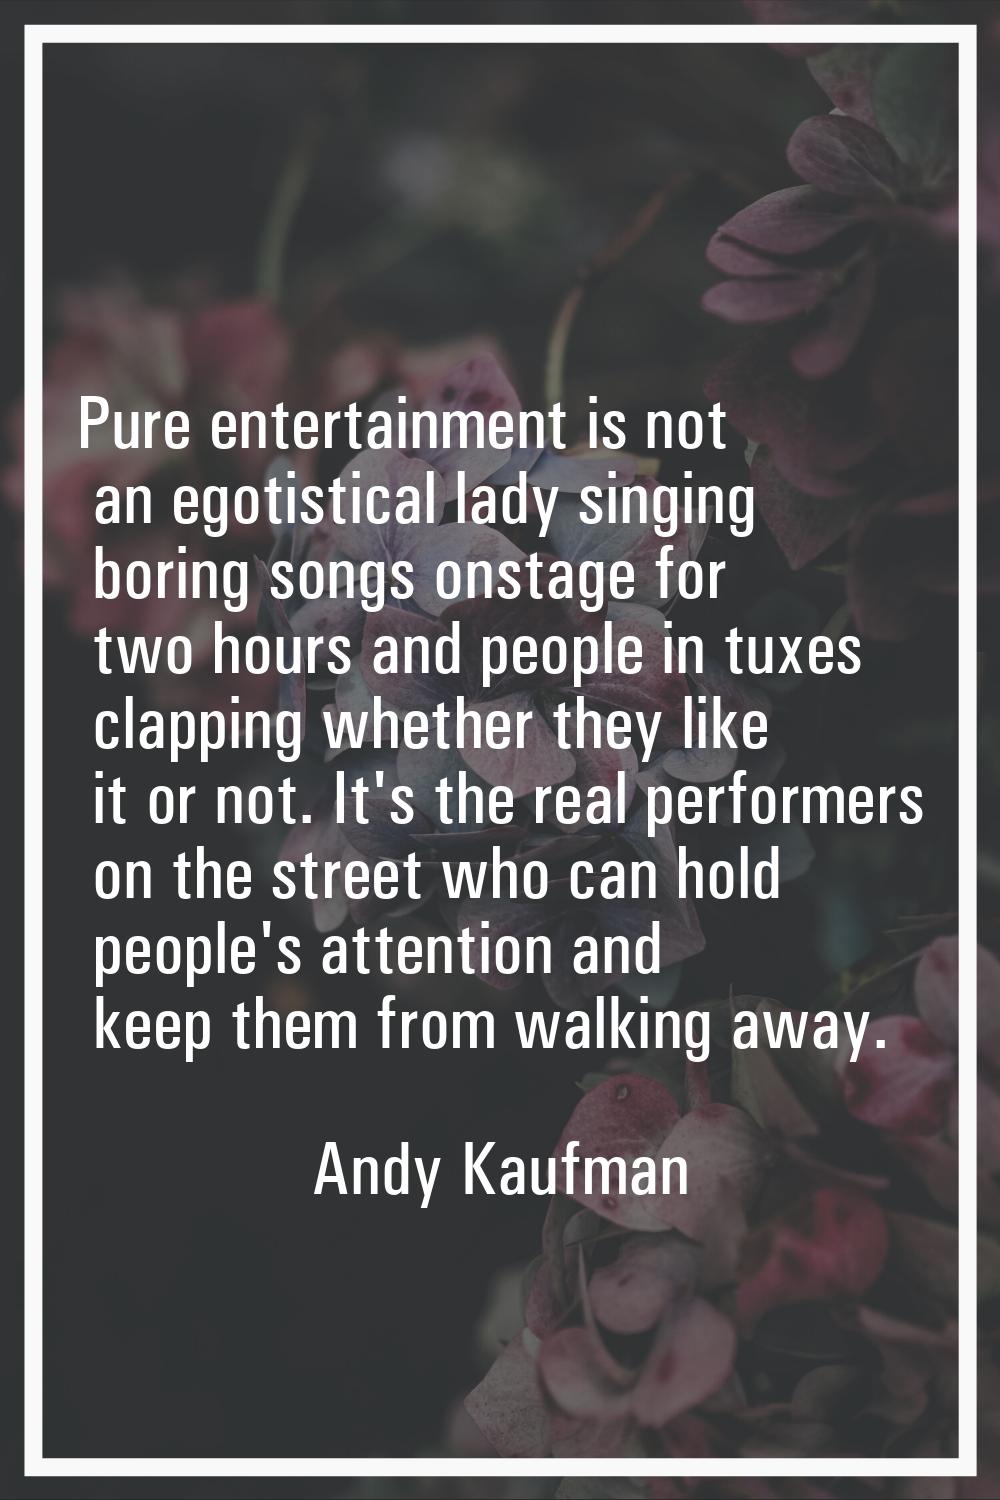 Pure entertainment is not an egotistical lady singing boring songs onstage for two hours and people